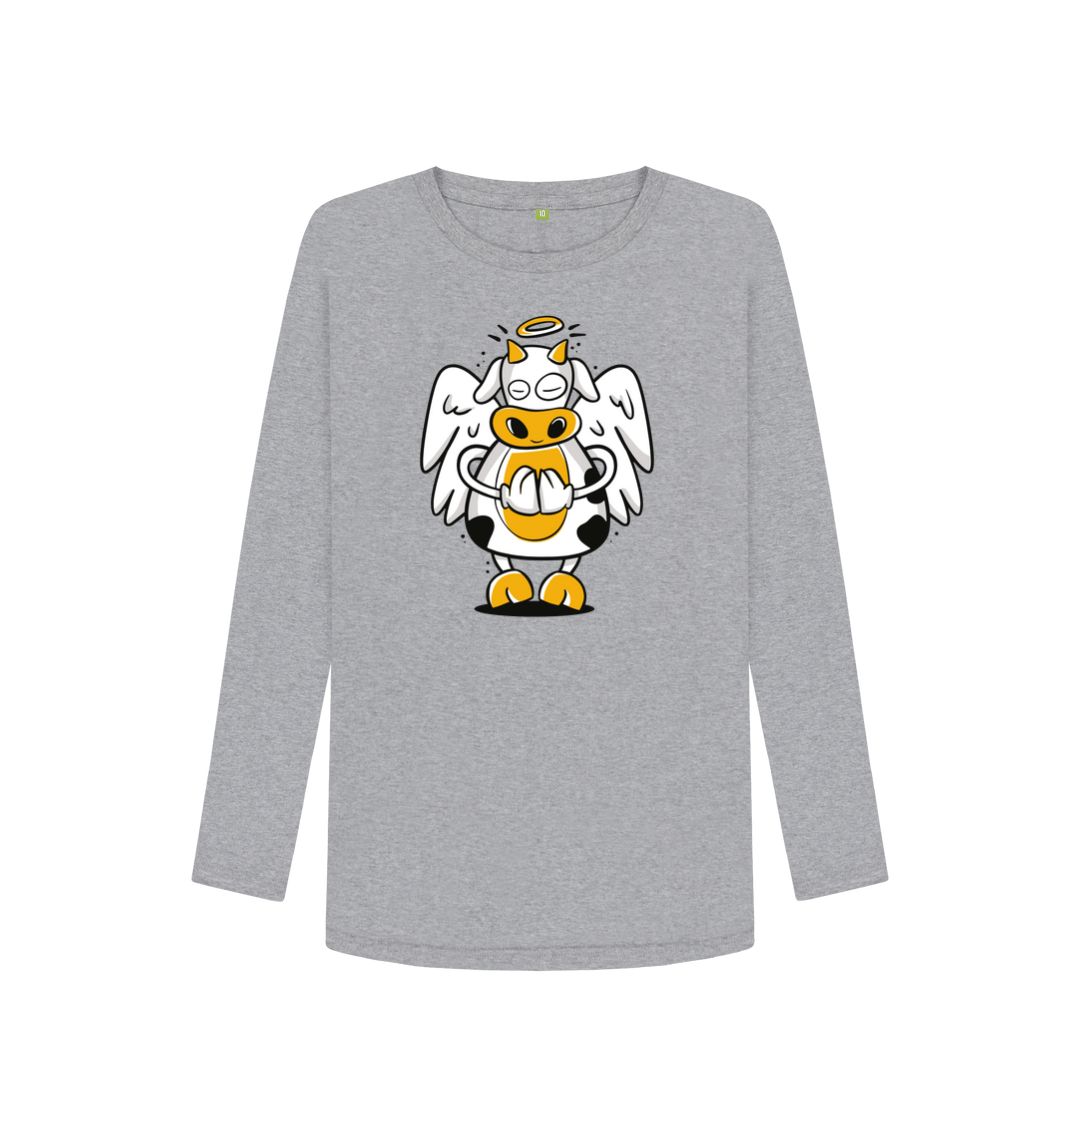 Athletic Grey Angelic Cow Women's Long Sleeve T-Shirt